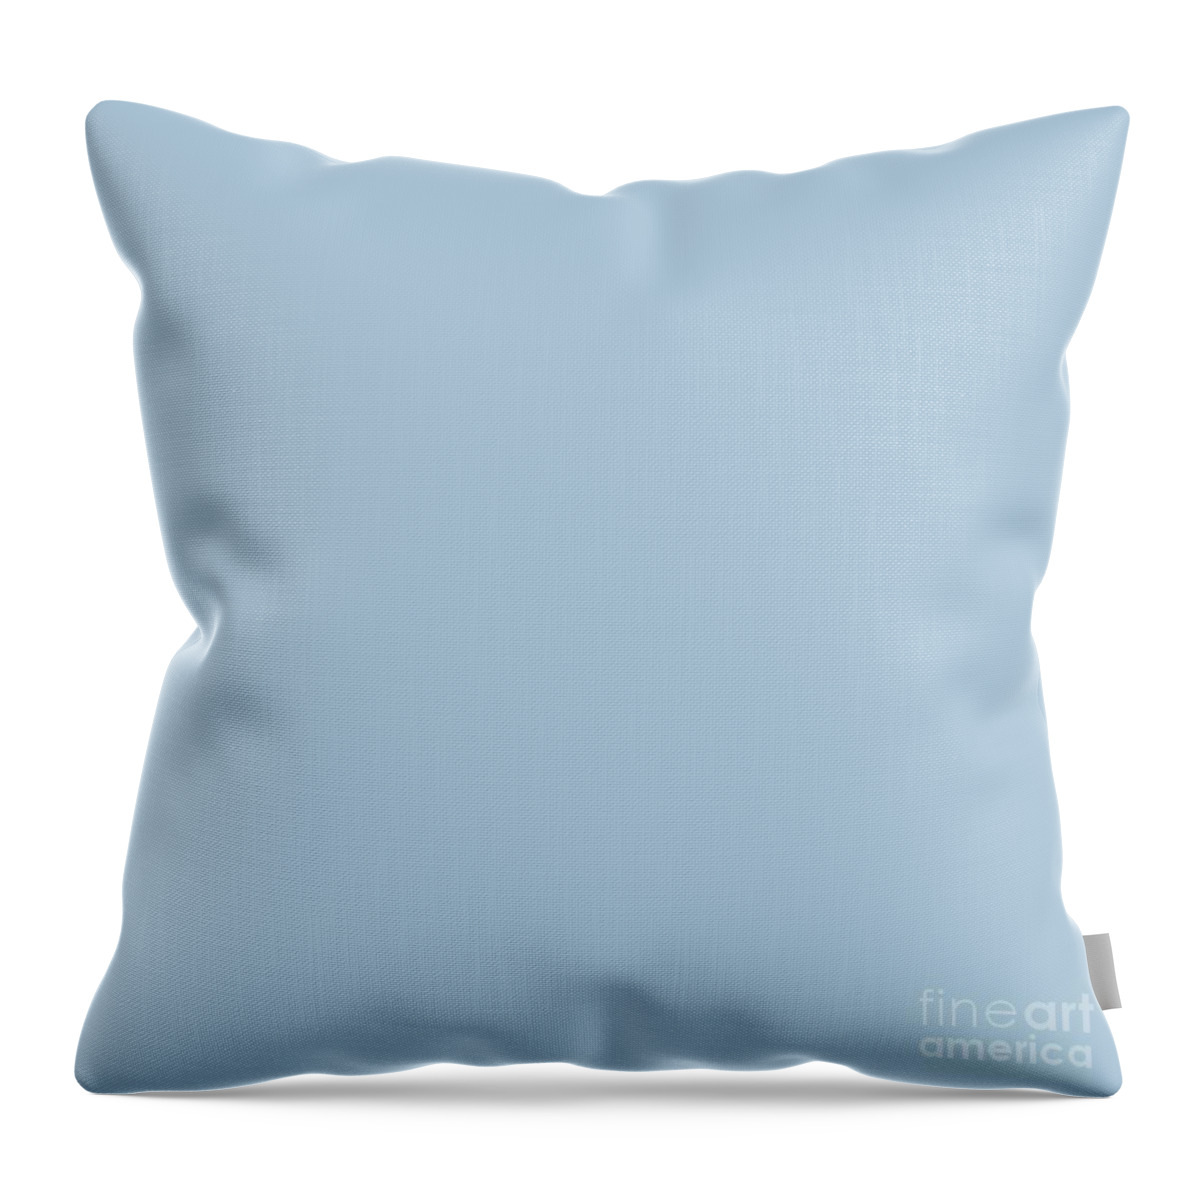 Winter Blue Solid Color For Home Decor Blankets And Pillows Throw Pillow featuring the digital art Winter Blue Solid Color for Home Decor Blankets and Pillows by Delynn Addams